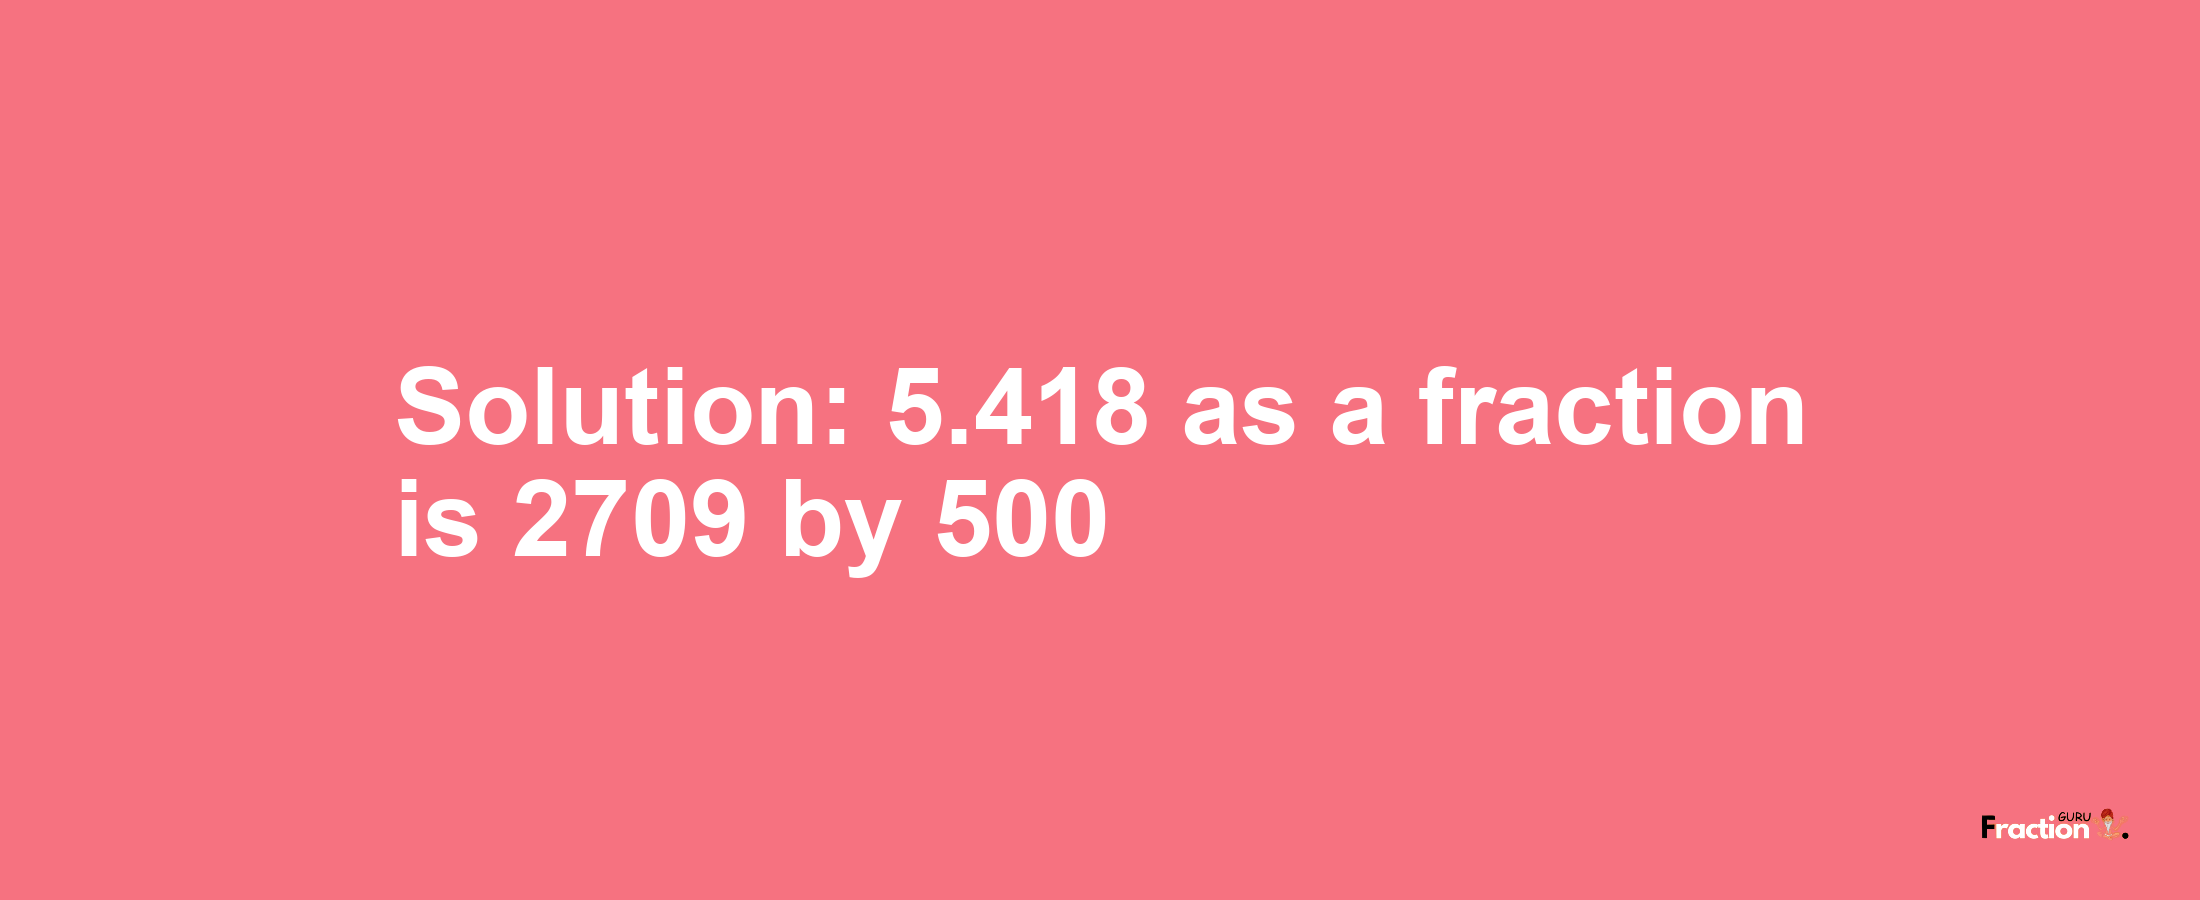 Solution:5.418 as a fraction is 2709/500